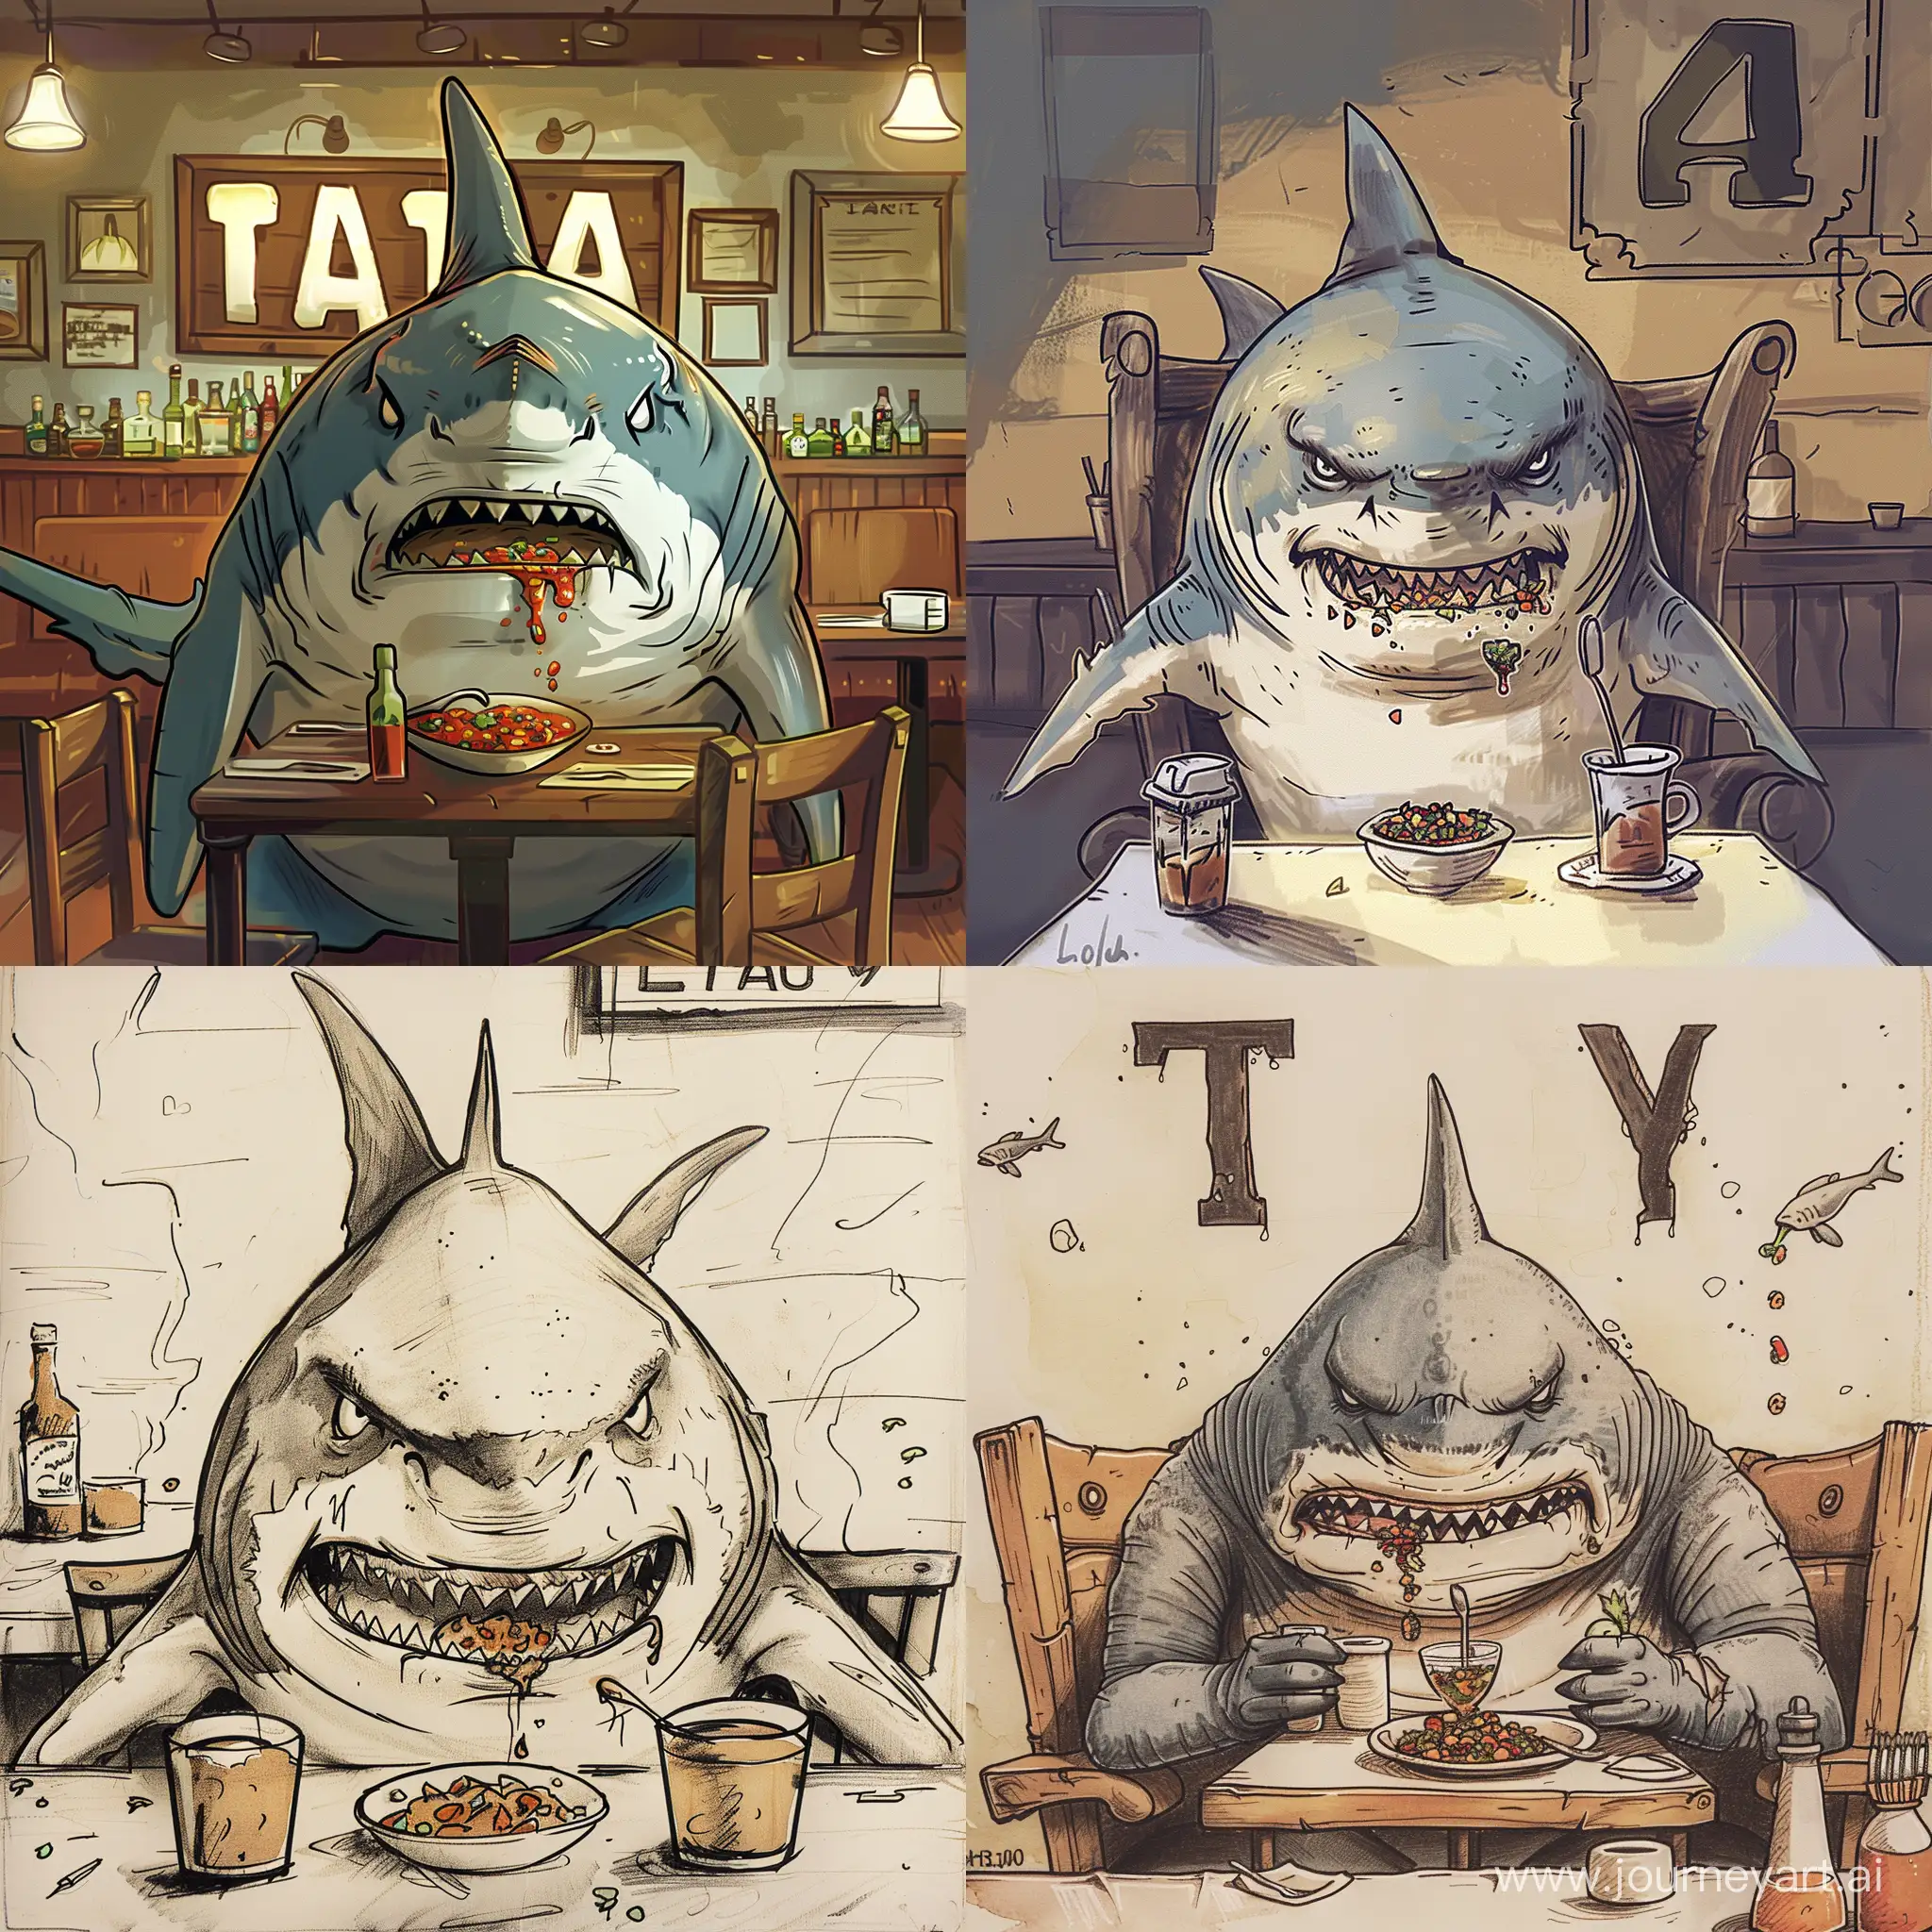 Draw an angry T shark eating salsa while sitting in the restaurant.